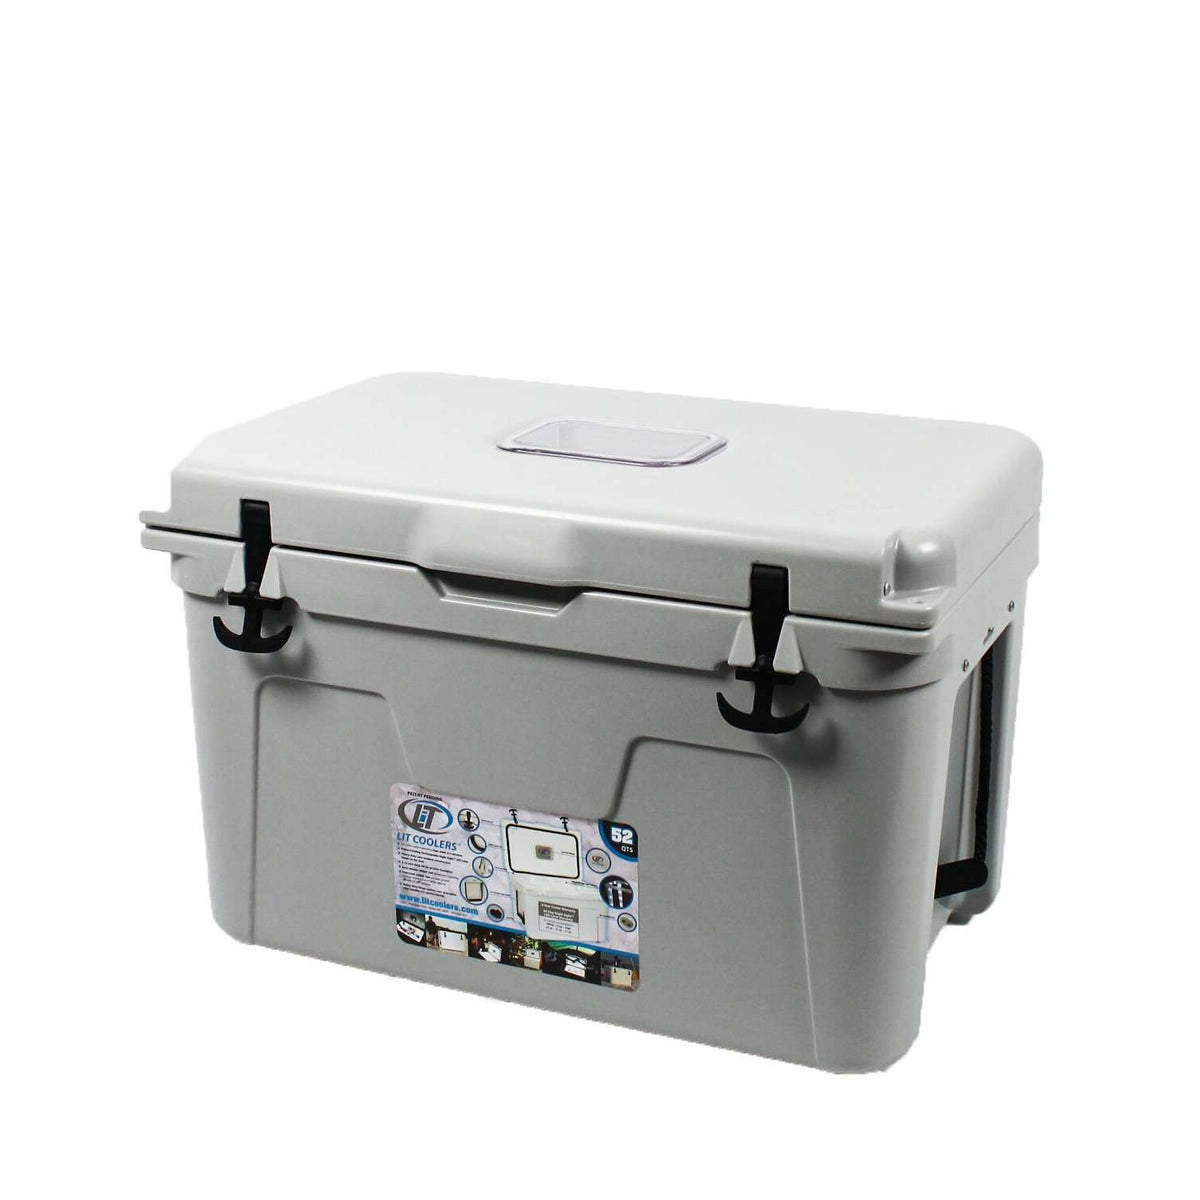 Limited Edition Longshanks Cooler 50qt in Grey by Lit Coolers - Country Club Prep